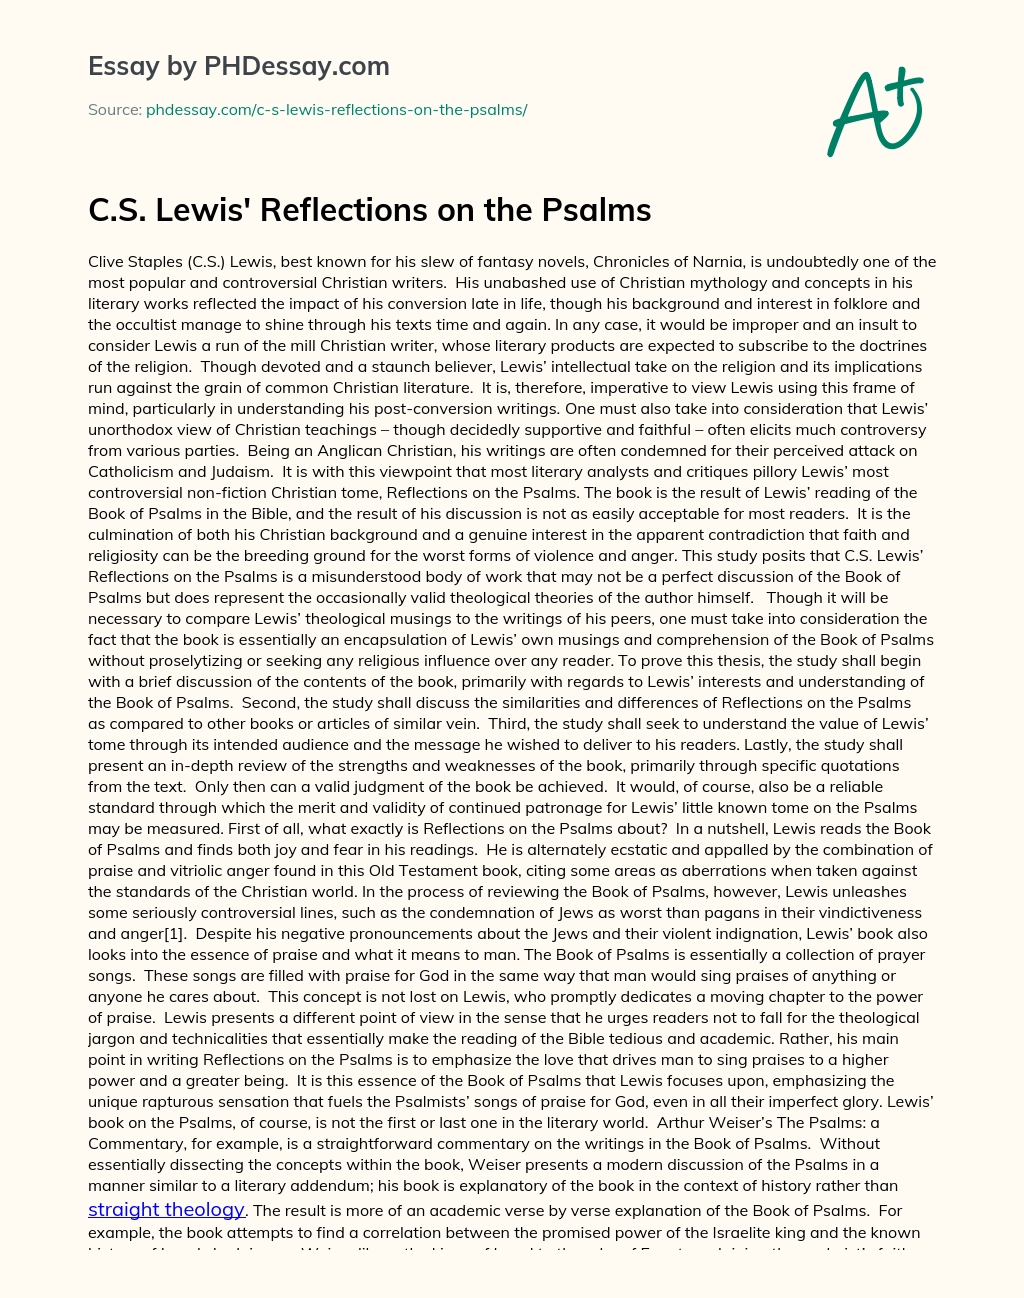 C.S. Lewis’ Reflections on the Psalms essay